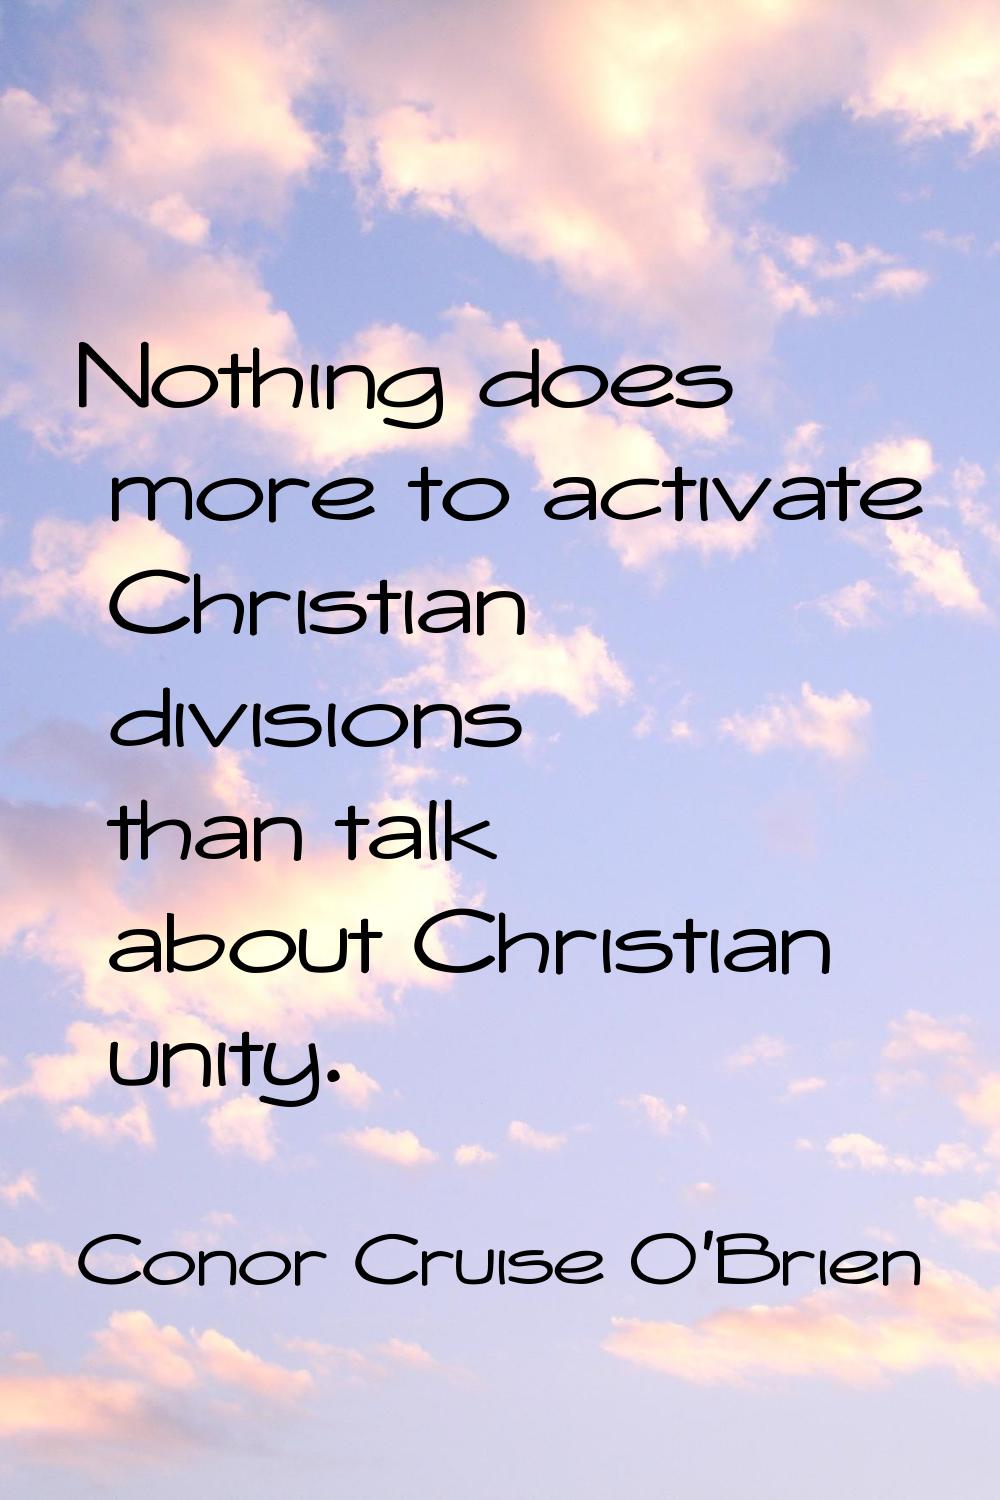 Nothing does more to activate Christian divisions than talk about Christian unity.